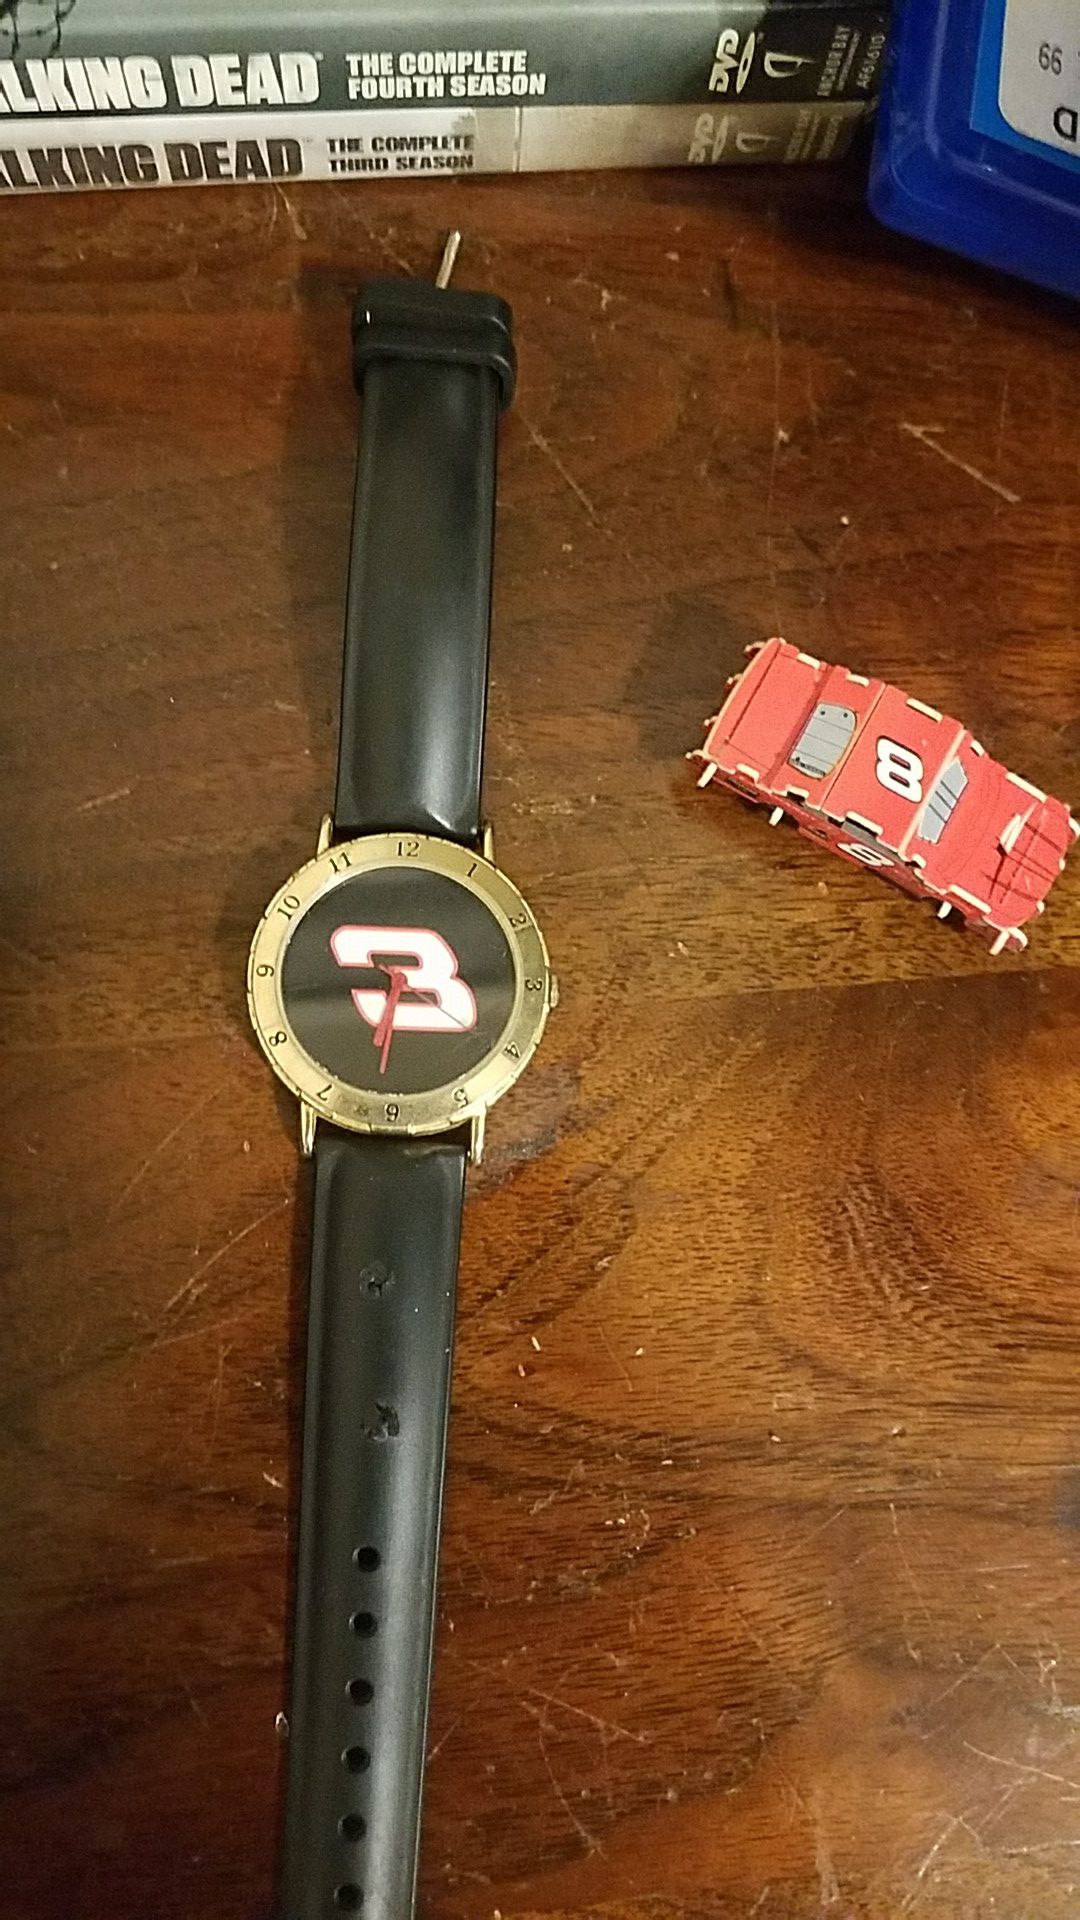 Dale Earnhardt collectible watch and Dale Earnhardt jr. Toy model car